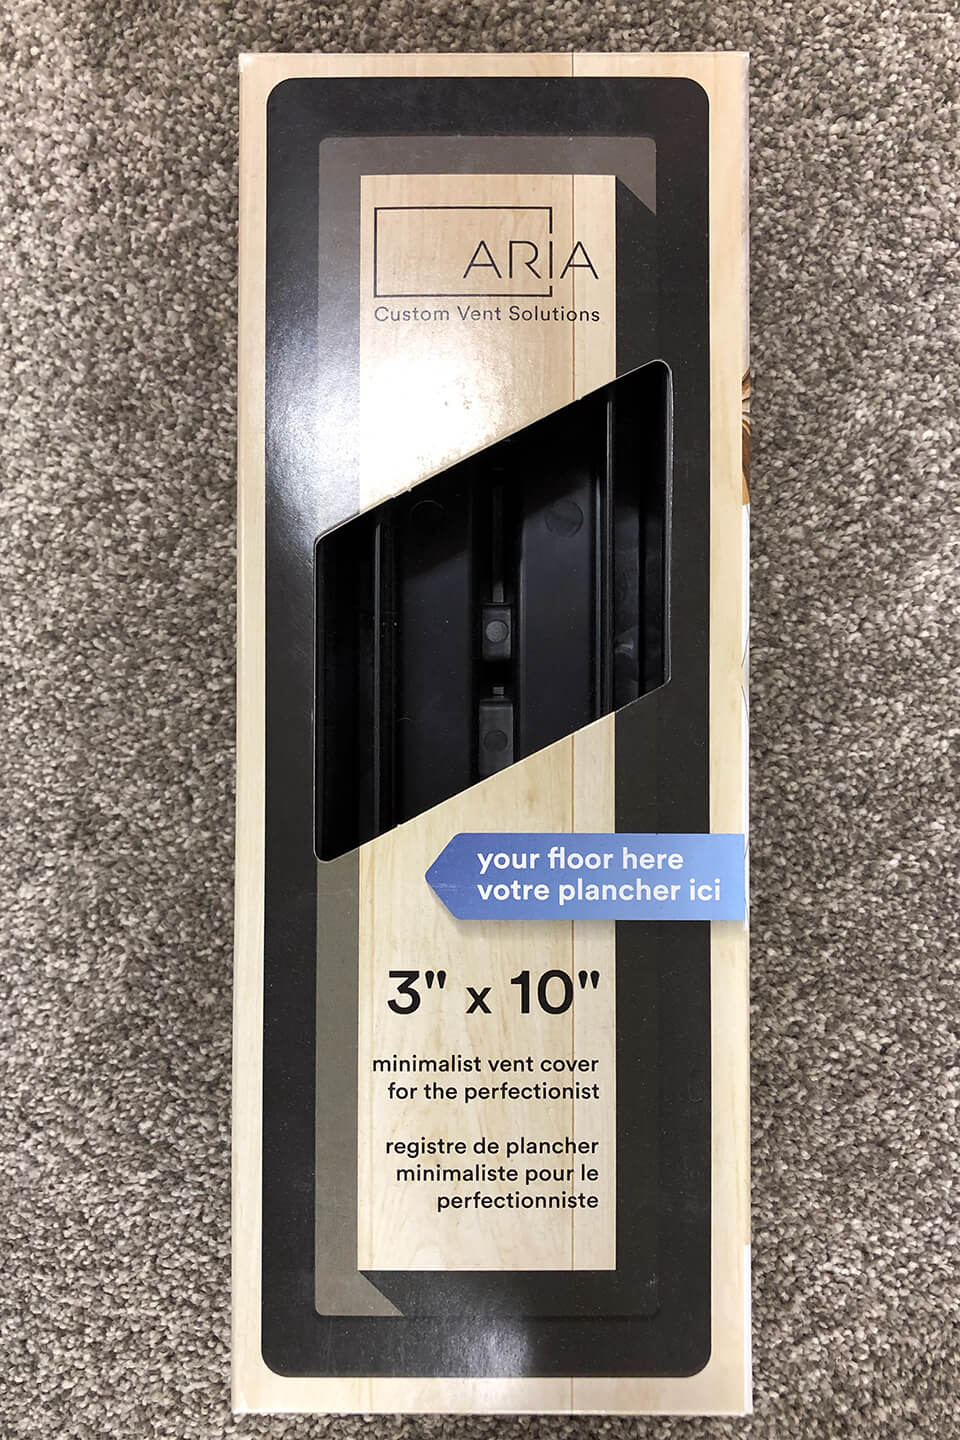 Aria custom vent solutions written on the packaging.